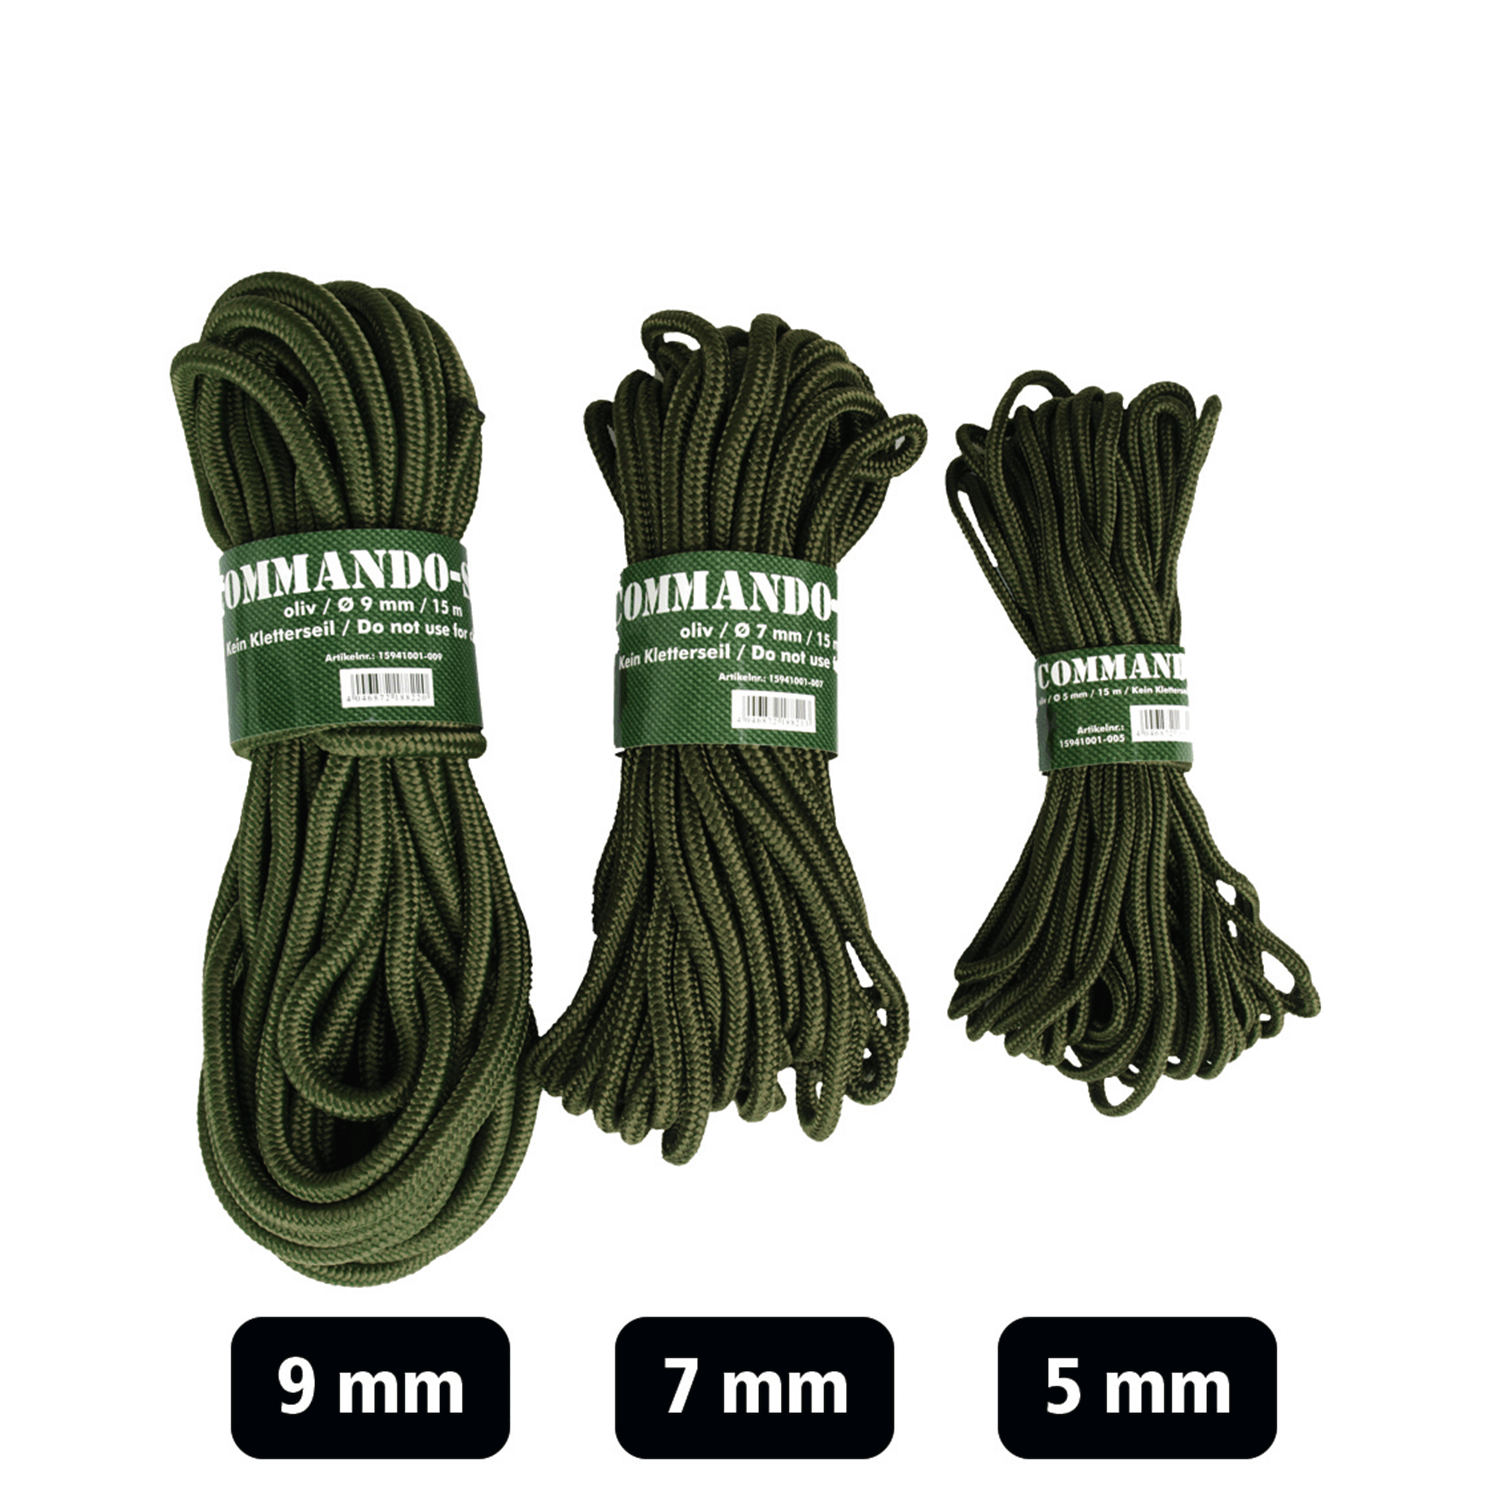 Mil-Tec paracord command (oliv) - Hunting Accessories